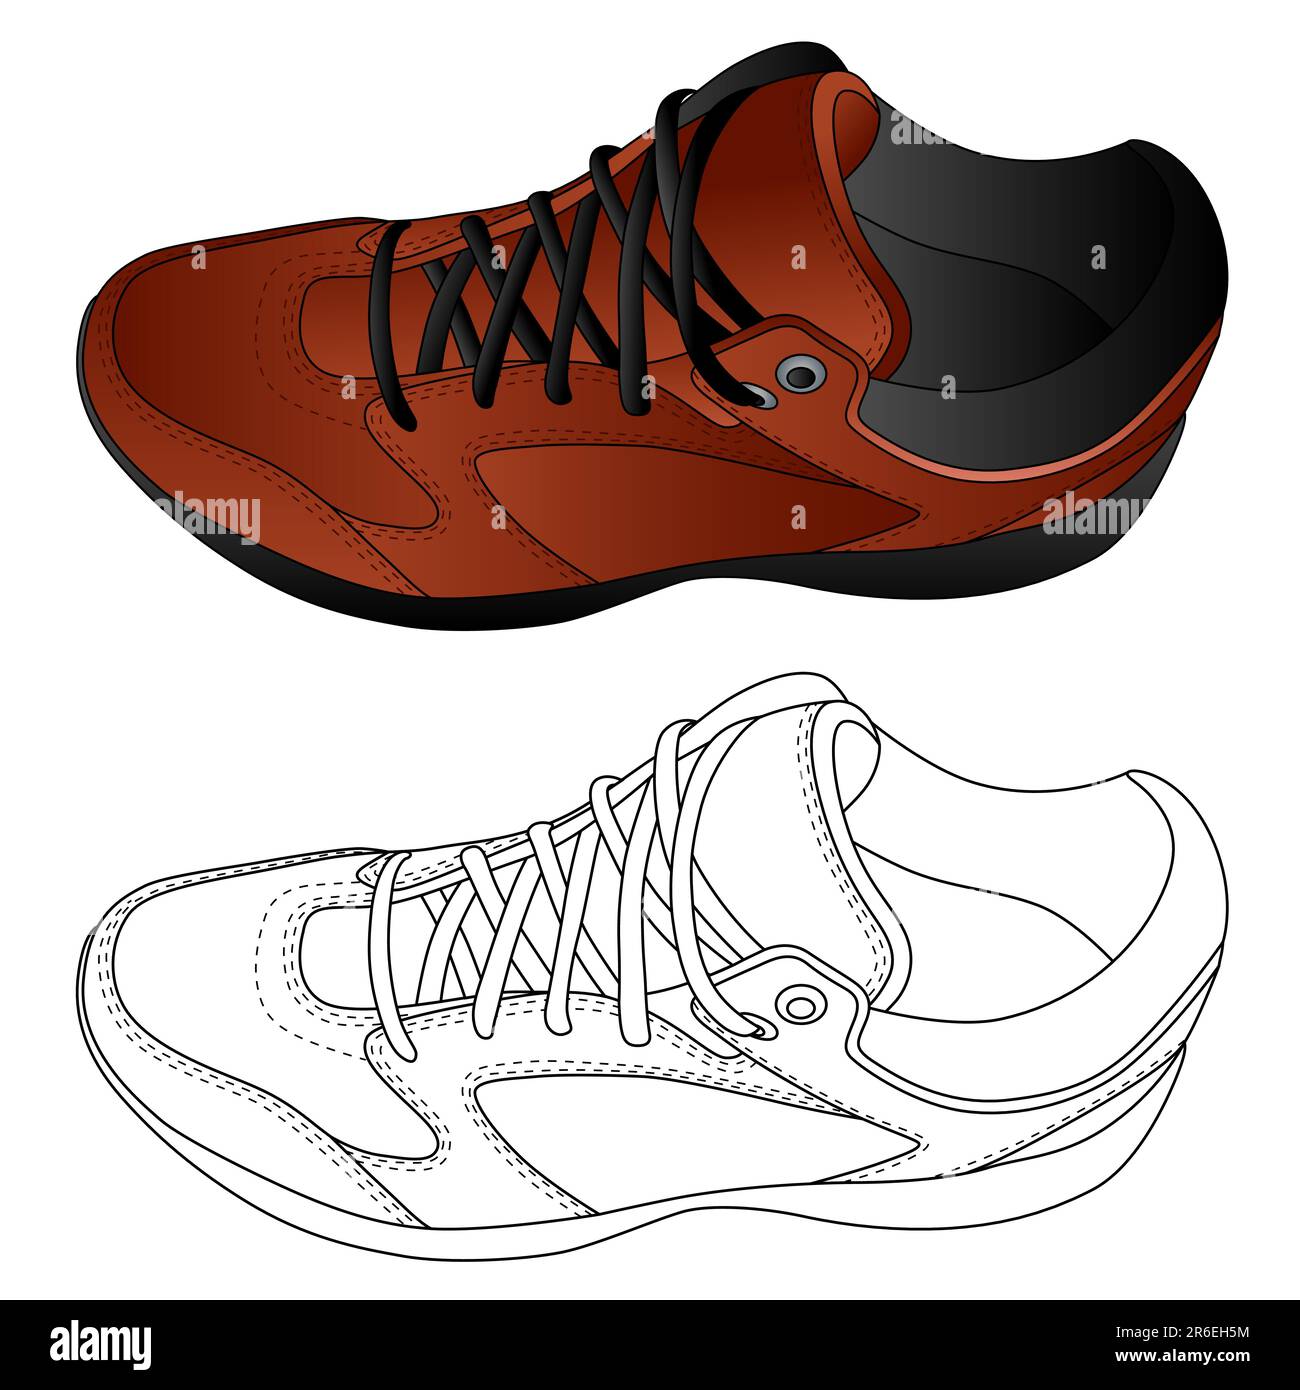 The image of sport shoes. Stock Vector